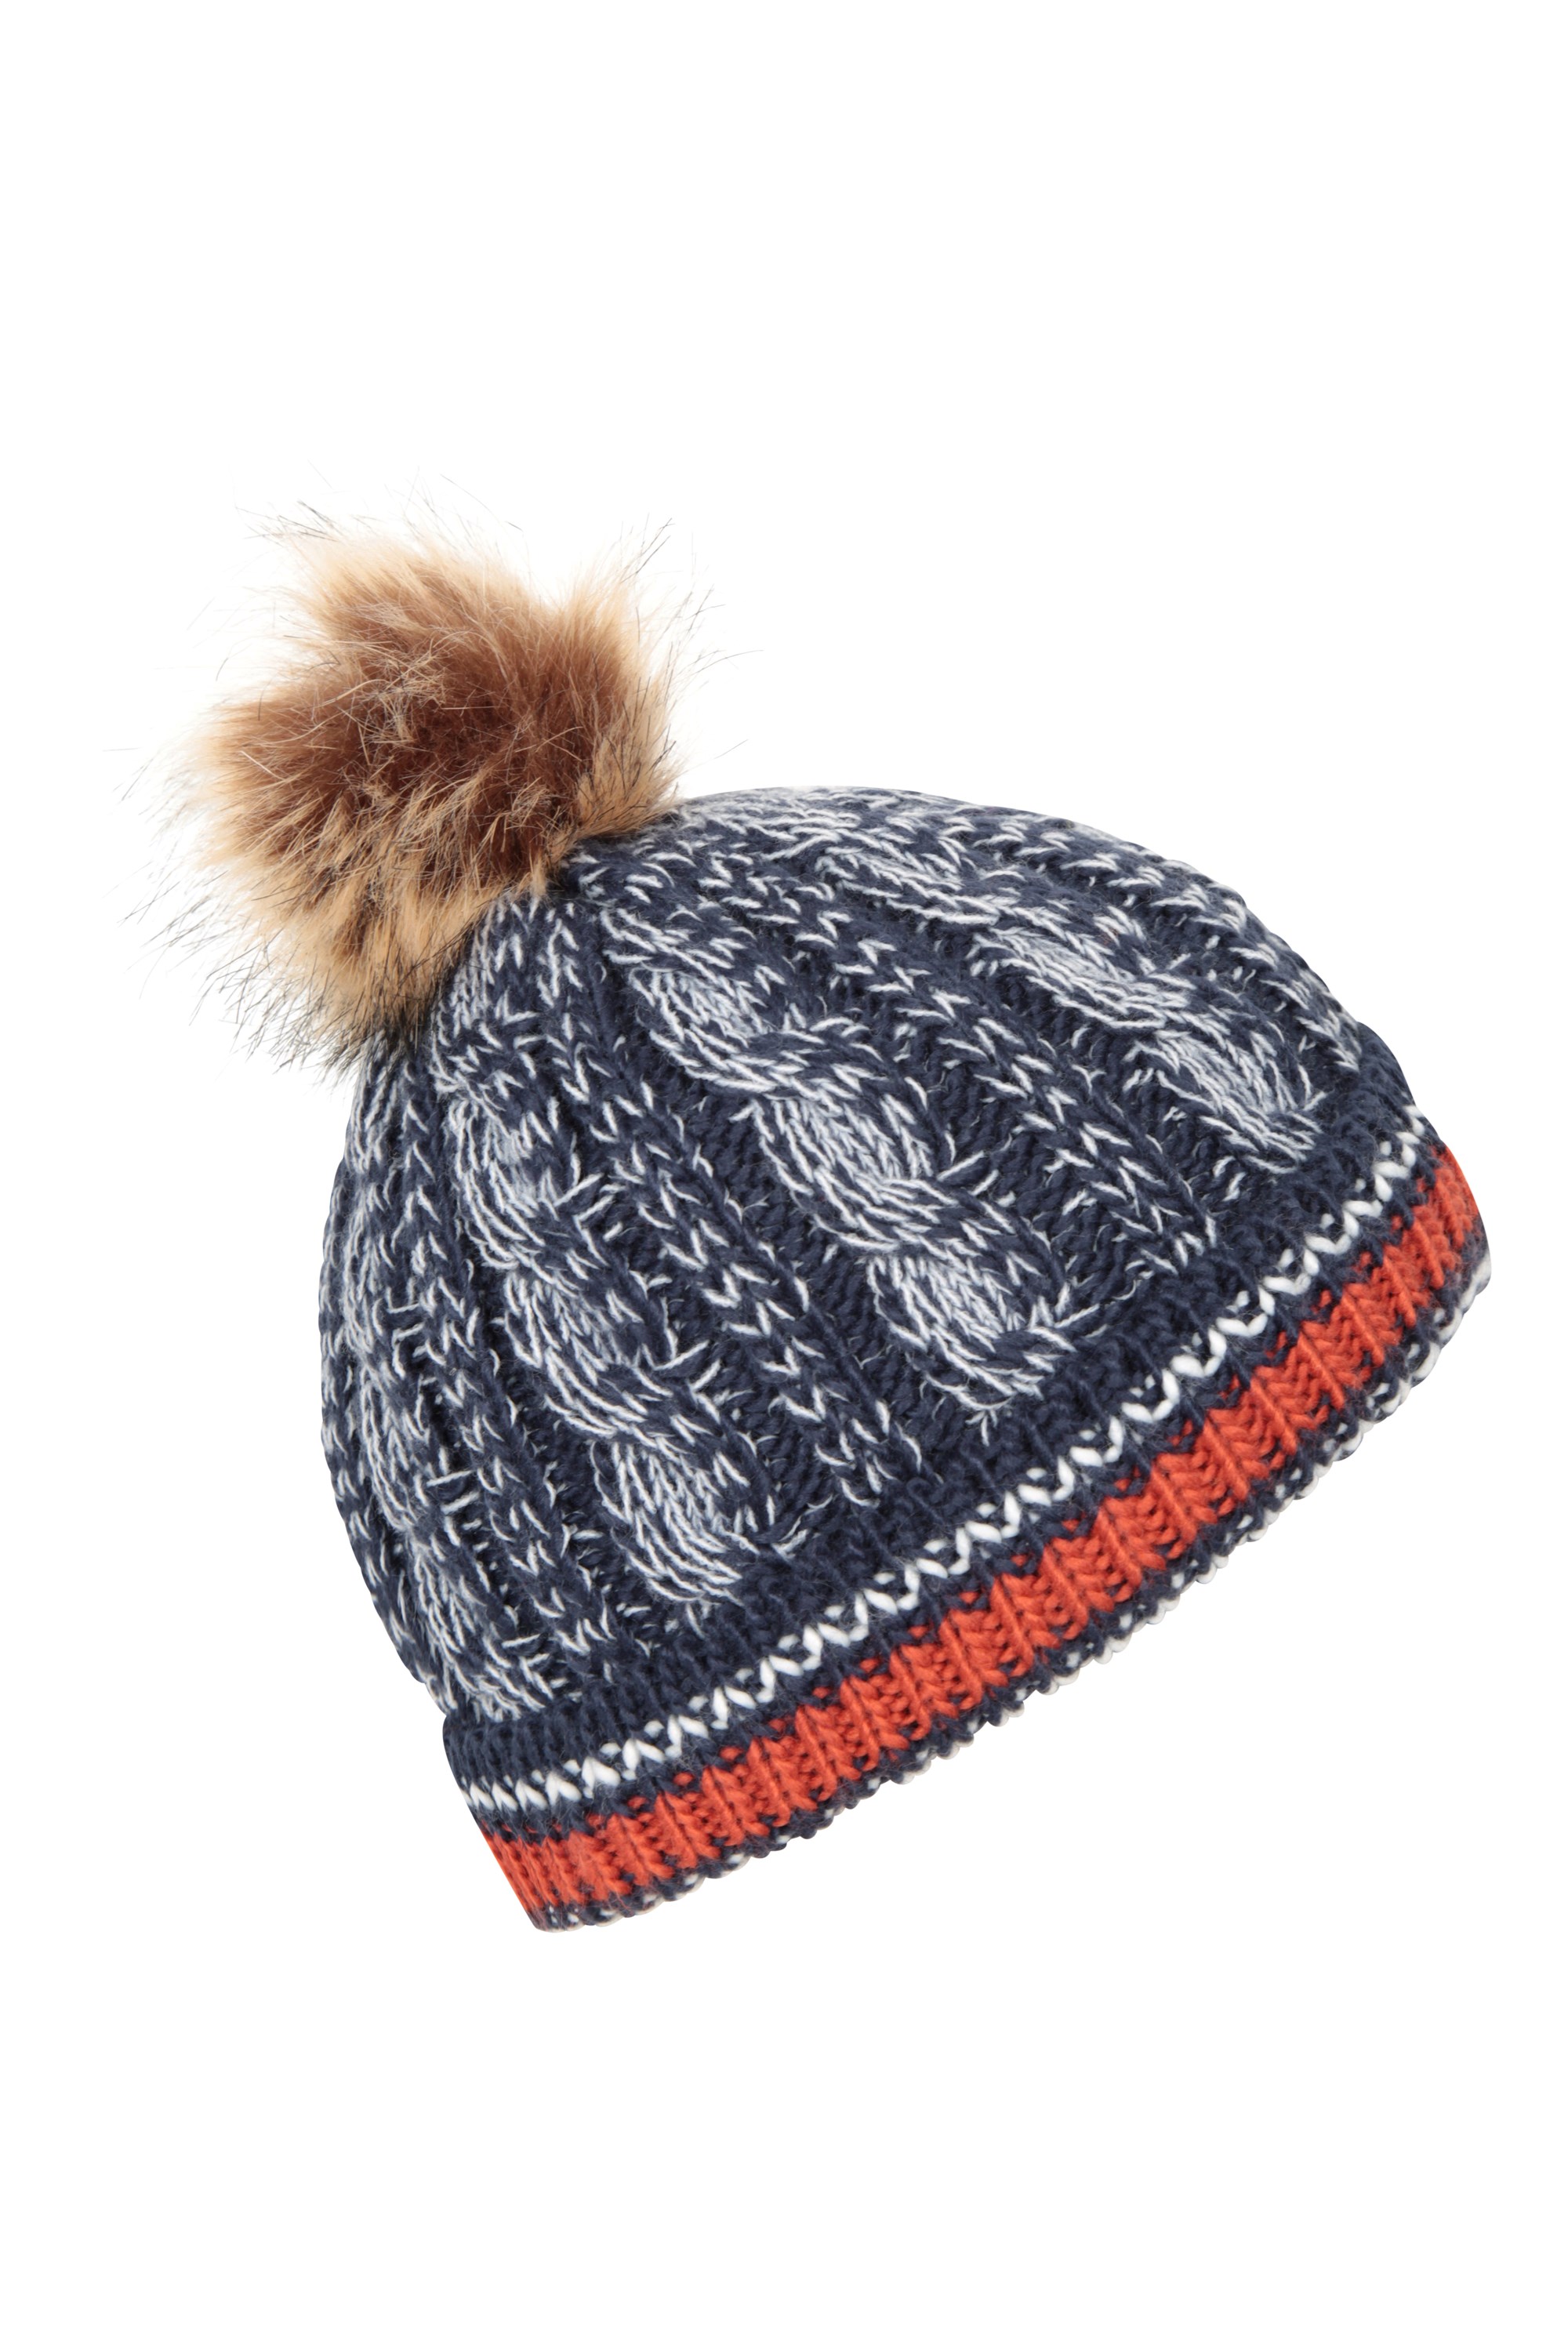 Mountain Warehouse Mountain Warehouse Childs Woollen Hat With Ear Covers Bobble & Tassels Fur Lined 